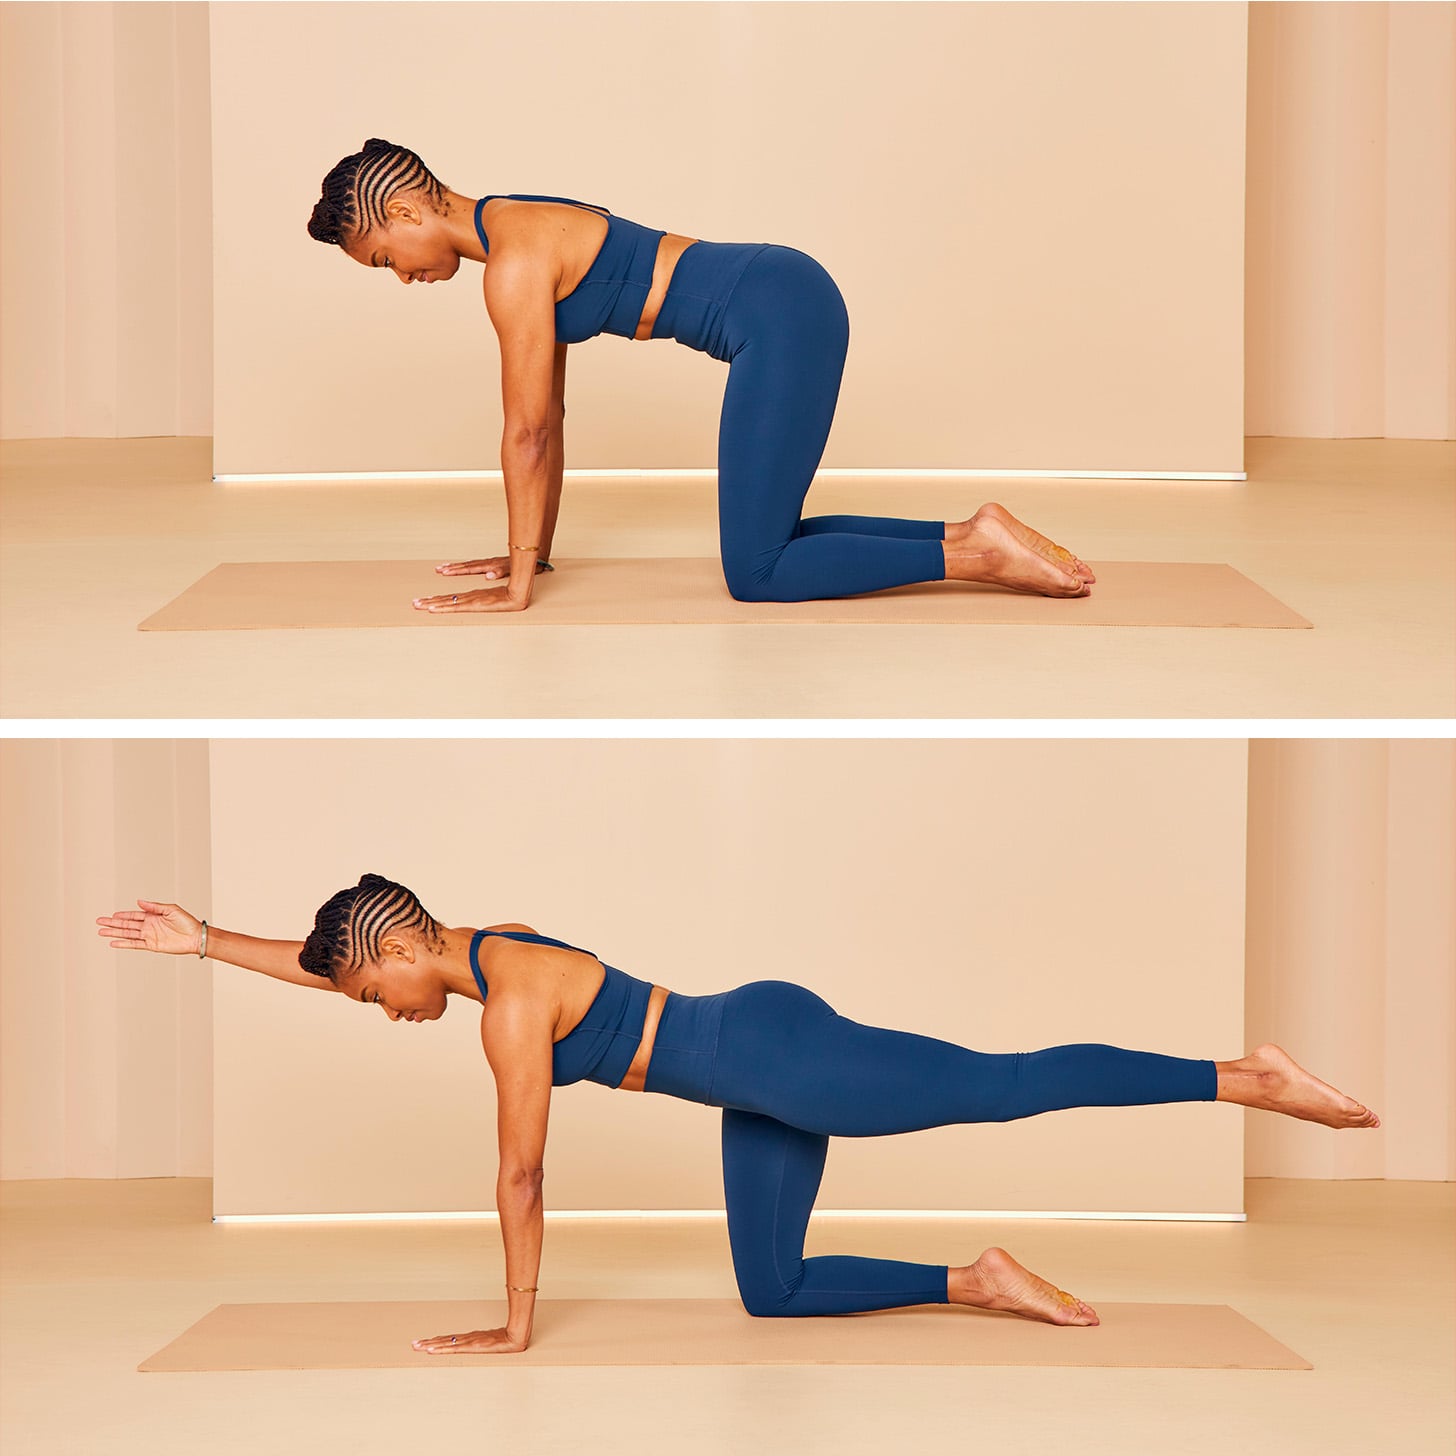 6 of the best Pilates core exercises to strengthen the abs and core muscles